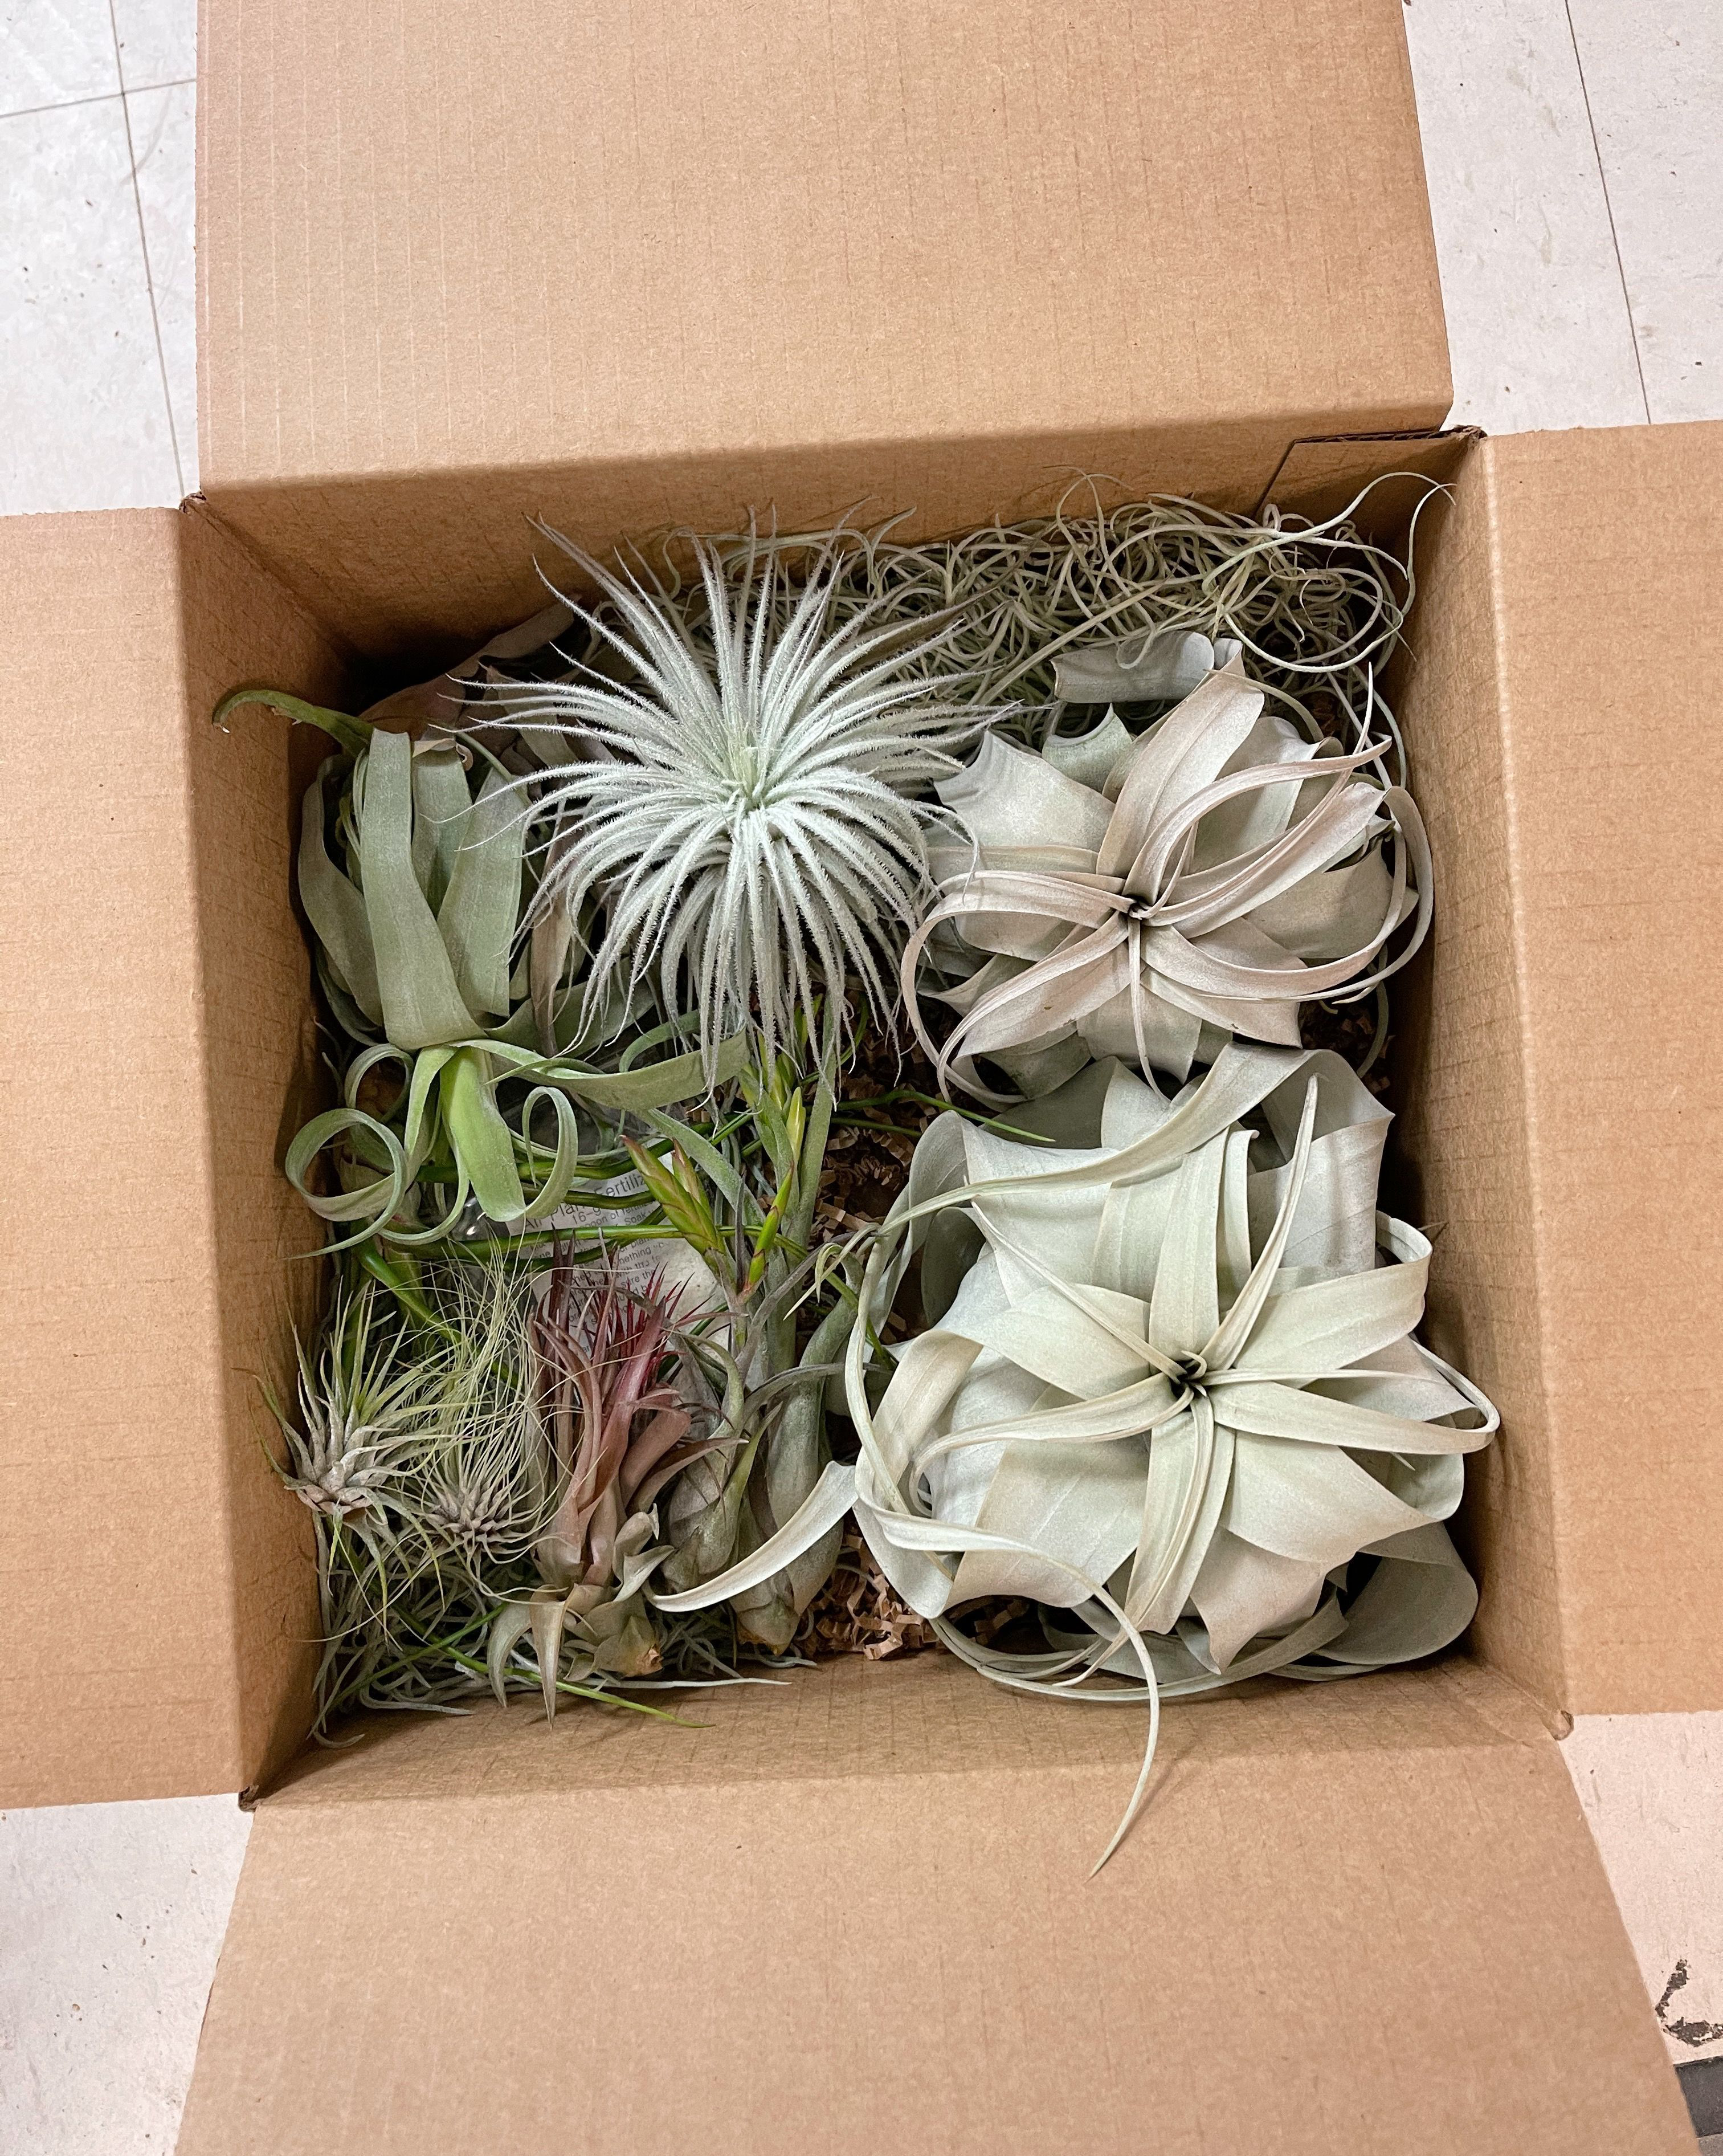 After You Have Made Your Order of Tillandsia Air Plants – Air